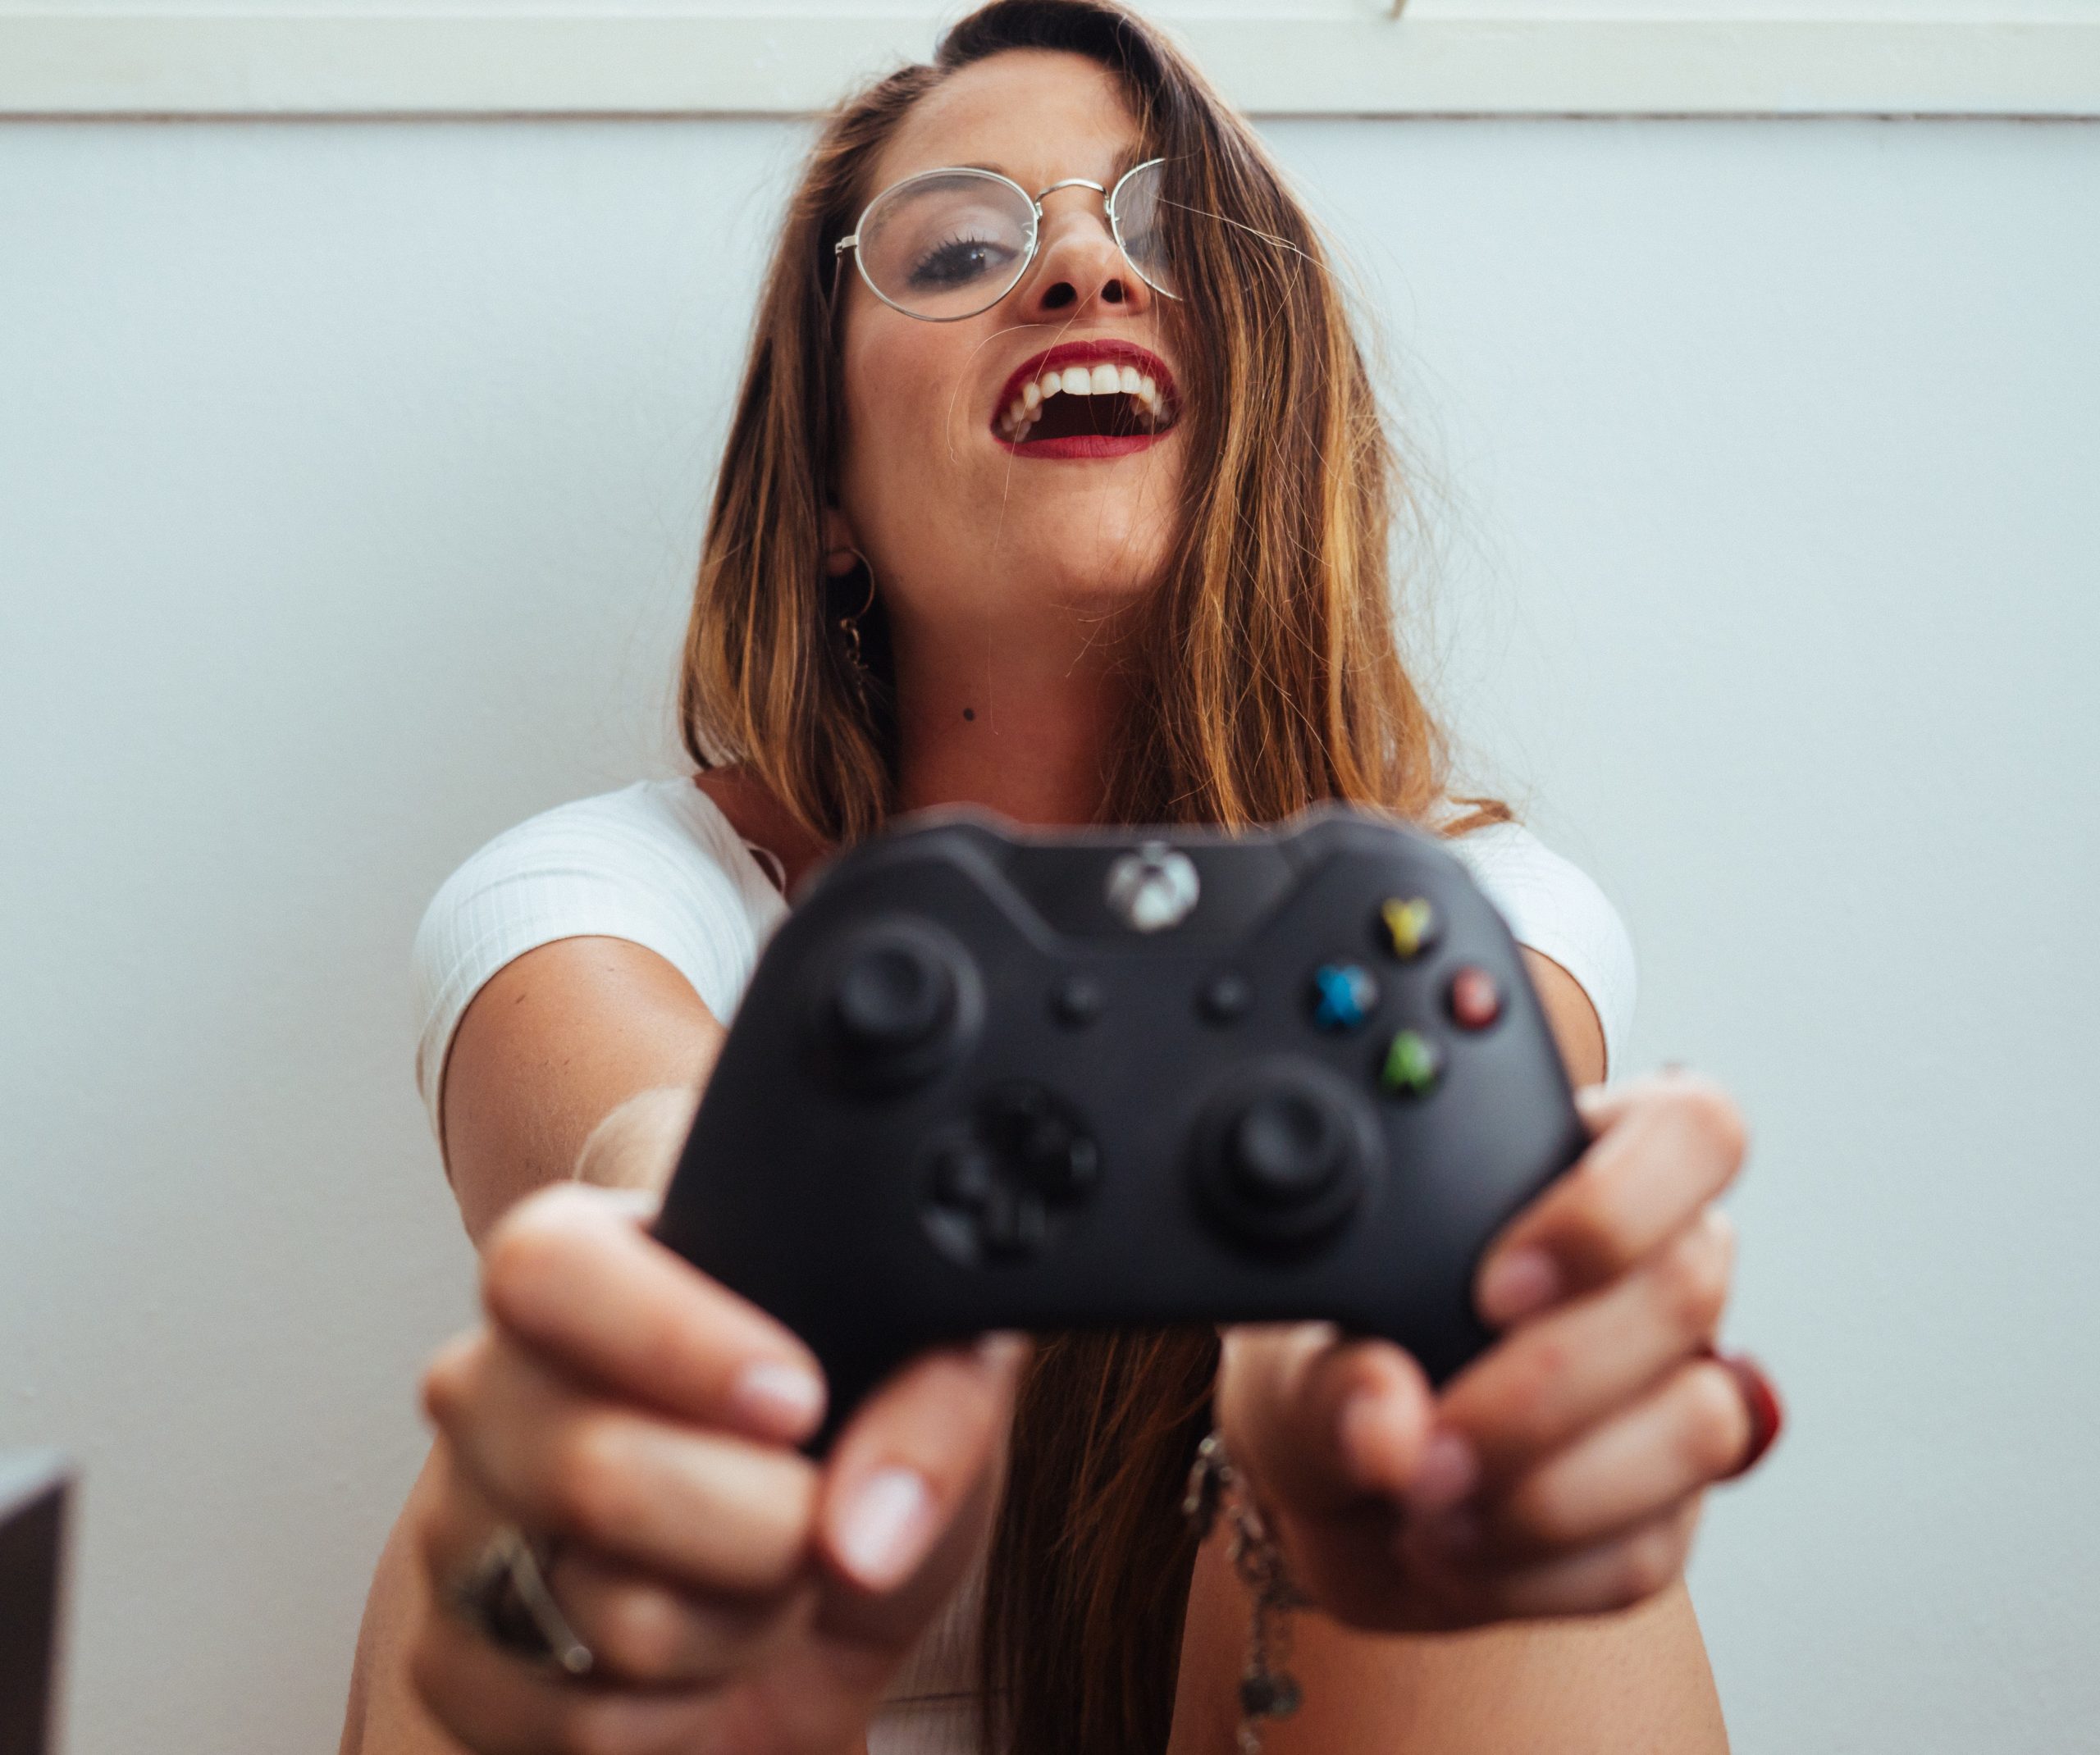 Girl holding an Xbox One controller and laughing